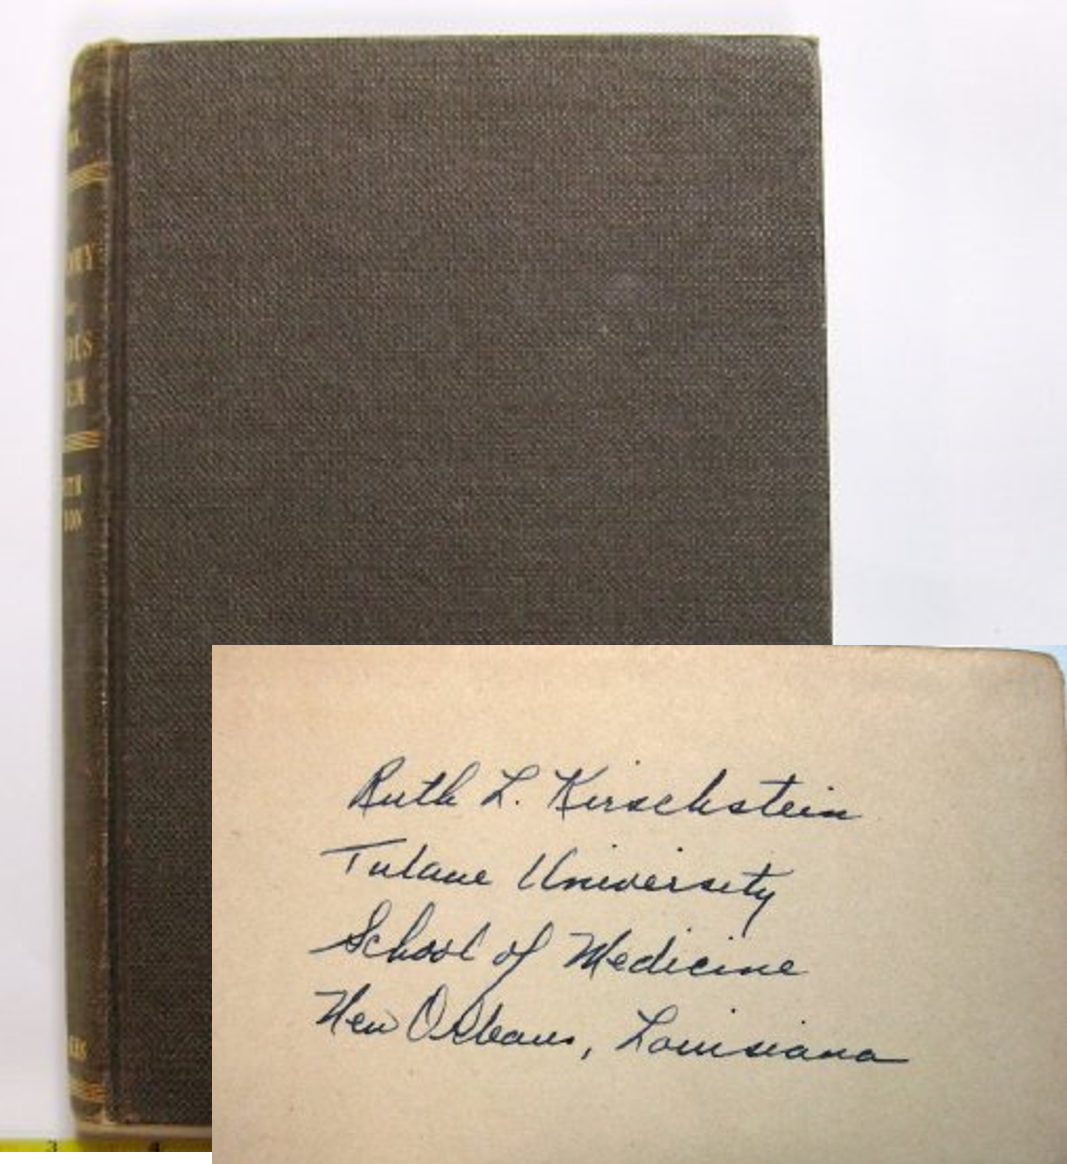 Ruth Kirschstein's copy of the book Anatomy of the Nervous System. Light green book cover with her name and Tulane University School of Medicine New Orleans, Louisiana written on the inside cover of the book.